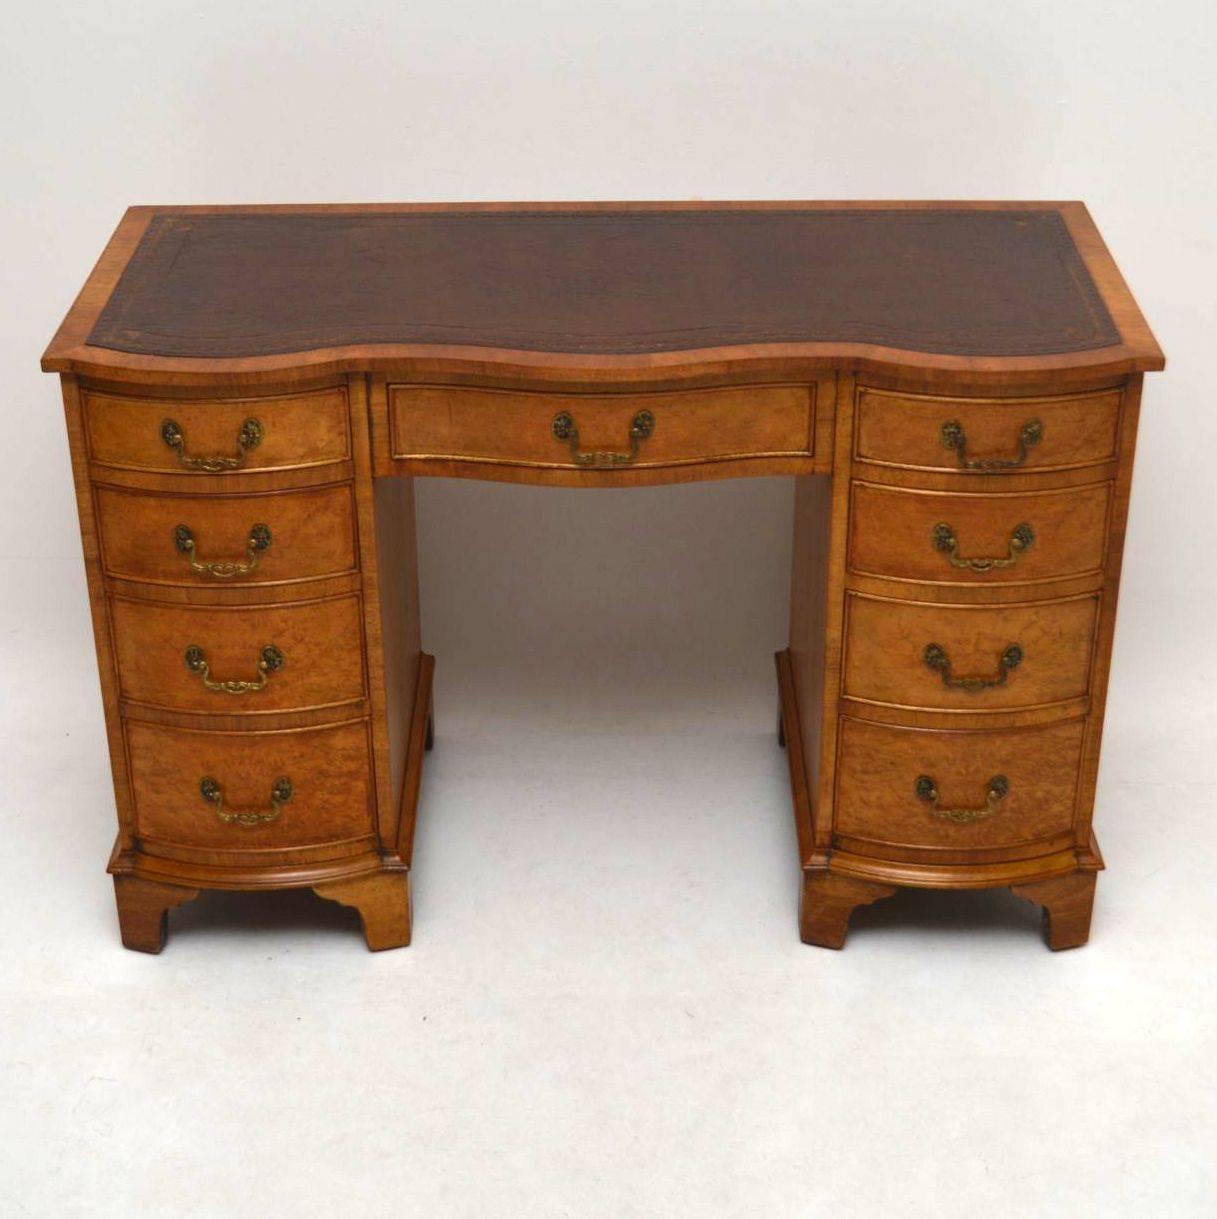 This antique burr walnut desk has a great shape and a wonderful mellow color. The burr walnut has intricate patterns all-over the front, sides and back. The tooled leather writing surface is original and still in good condition. The desk front is